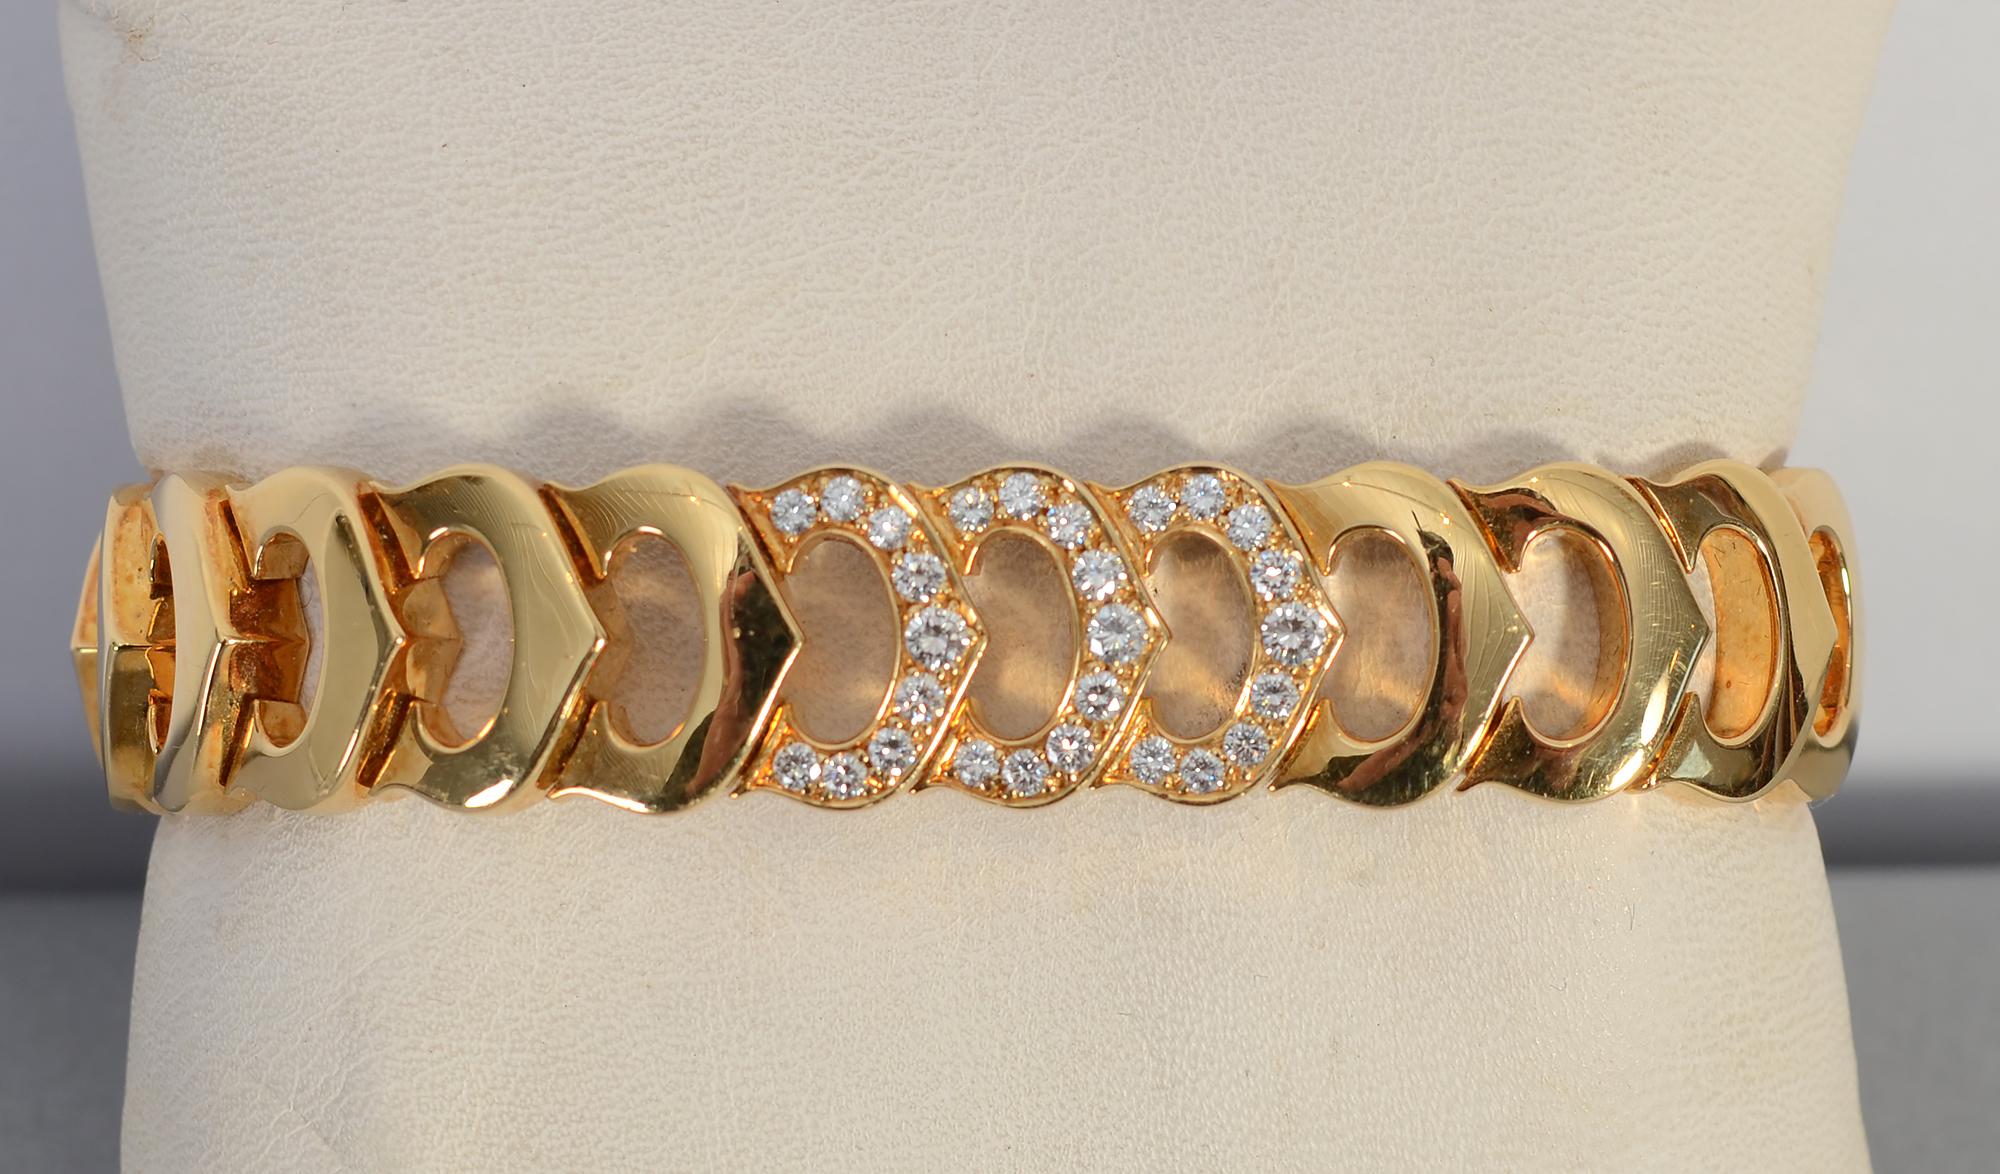 Elegant C de Cartier gold bracelet with 27 diamonds in the central three links. The bracelet is 7 inches in wearable length and 9/16